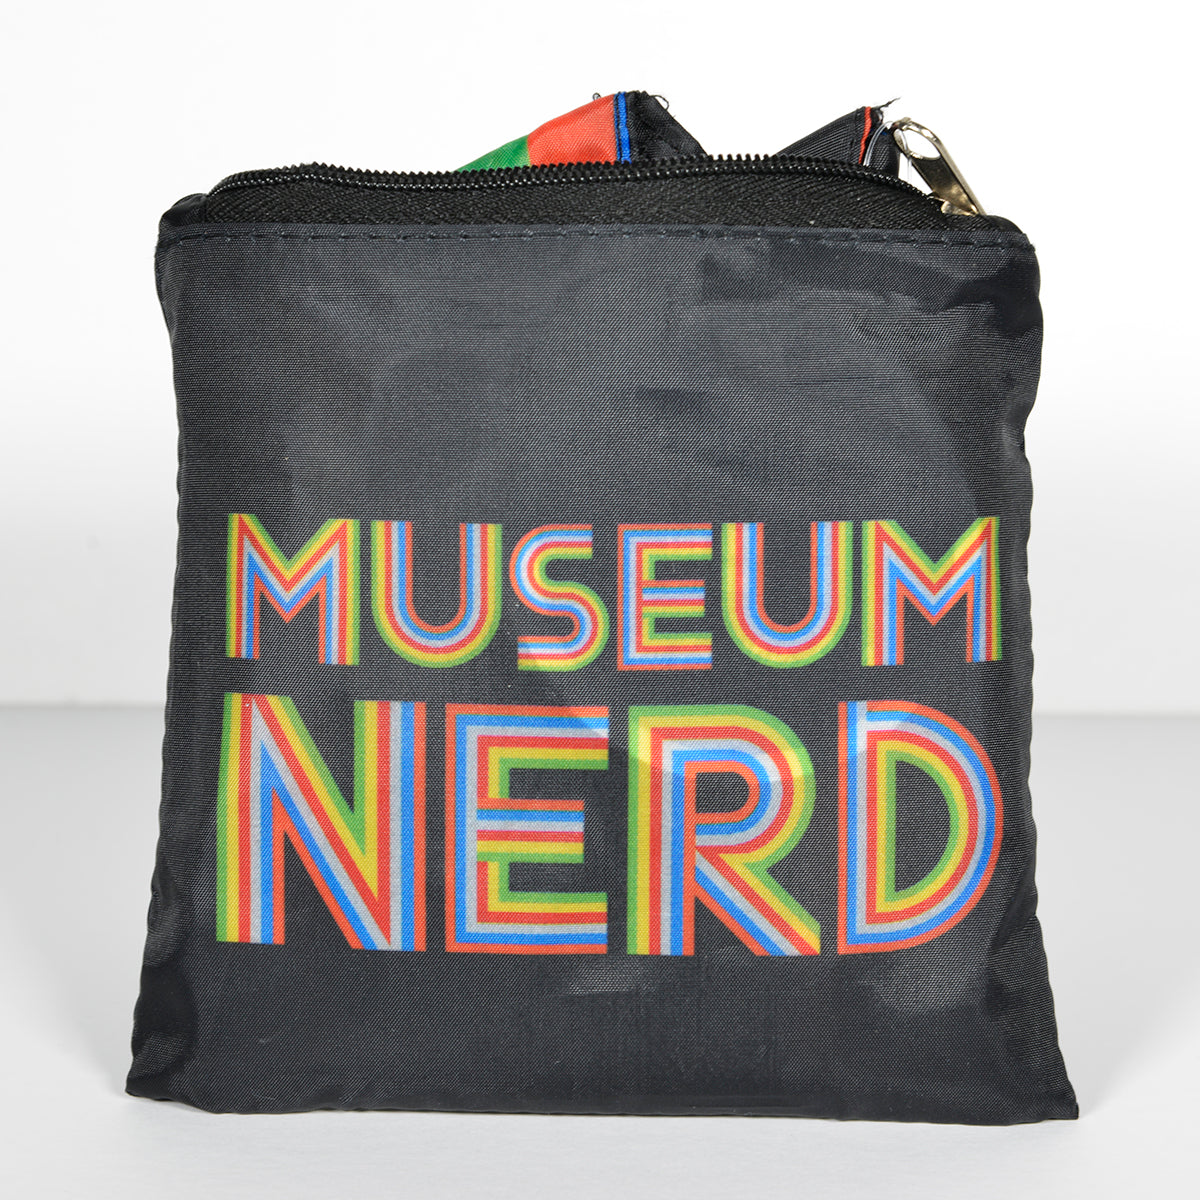 Museum Nerd tote folded and in small container bag.